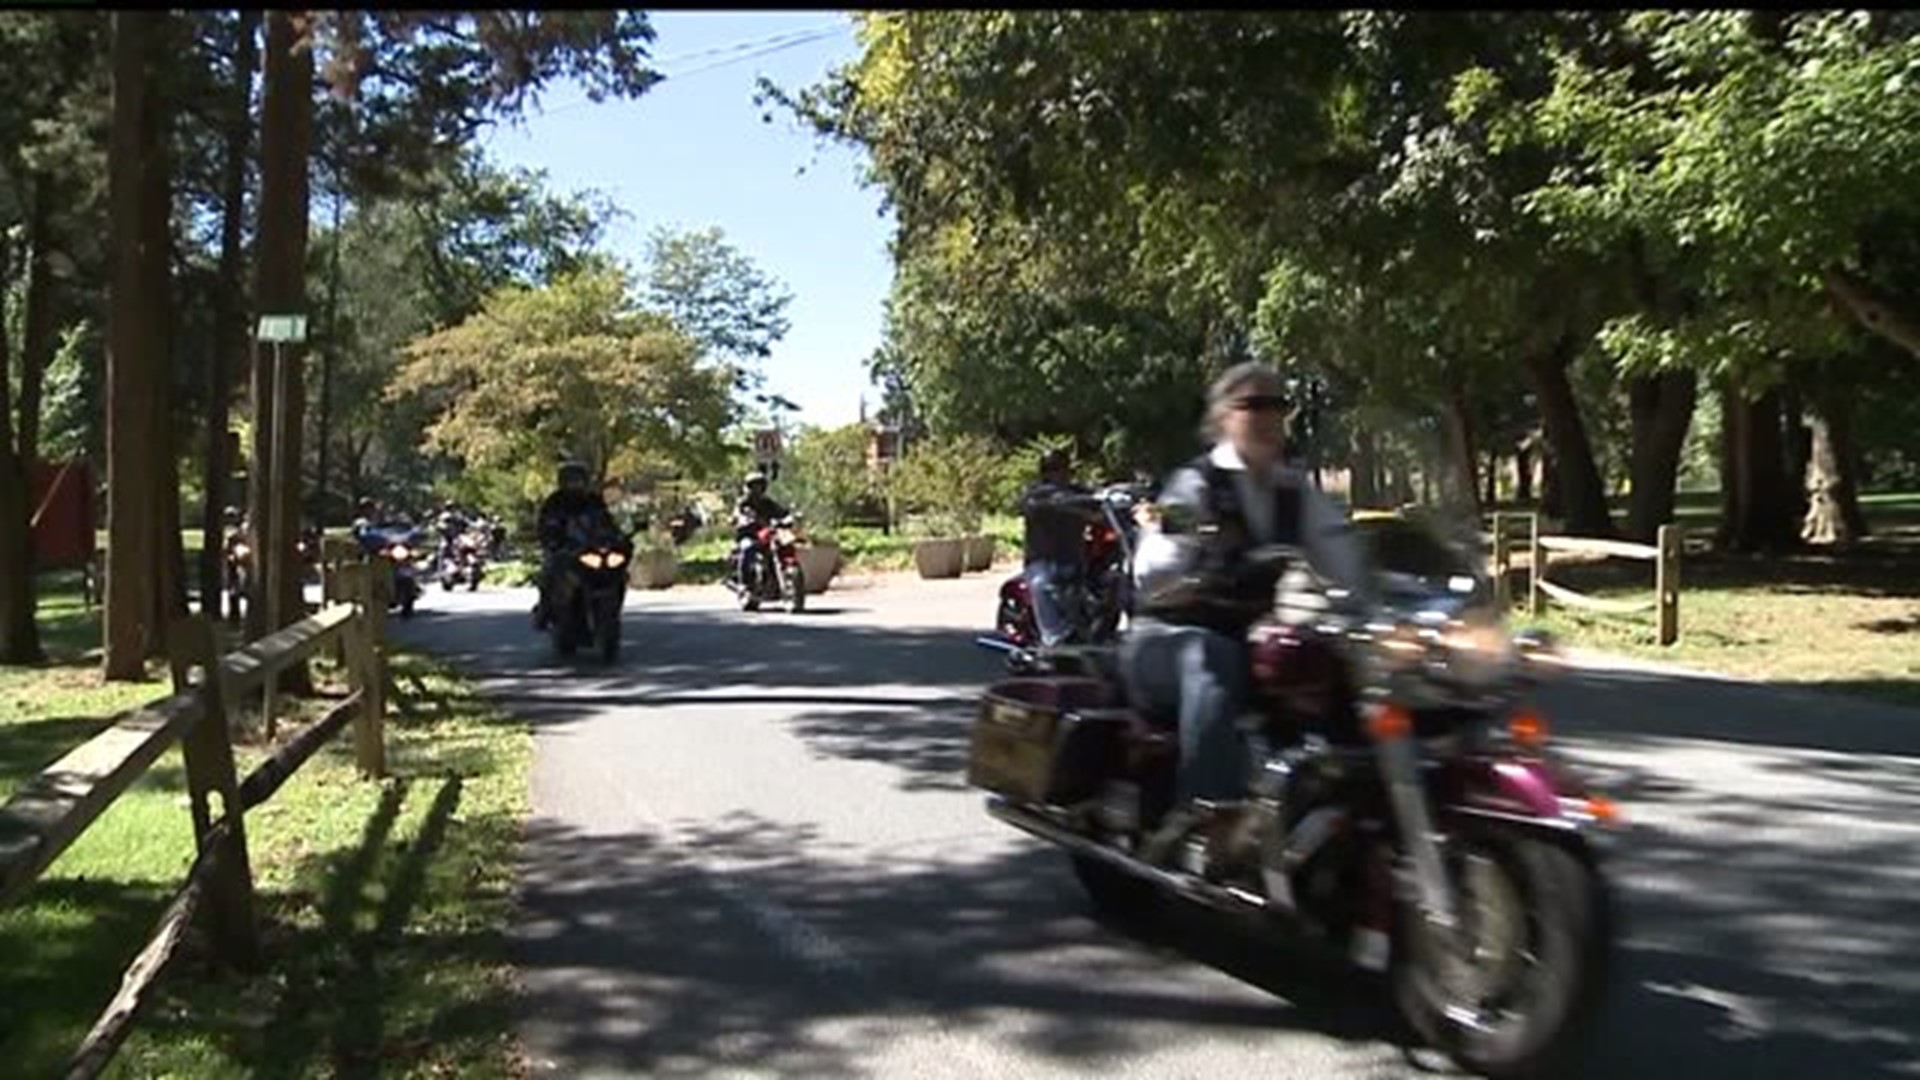 Motorcycle ride raises funds for mental health